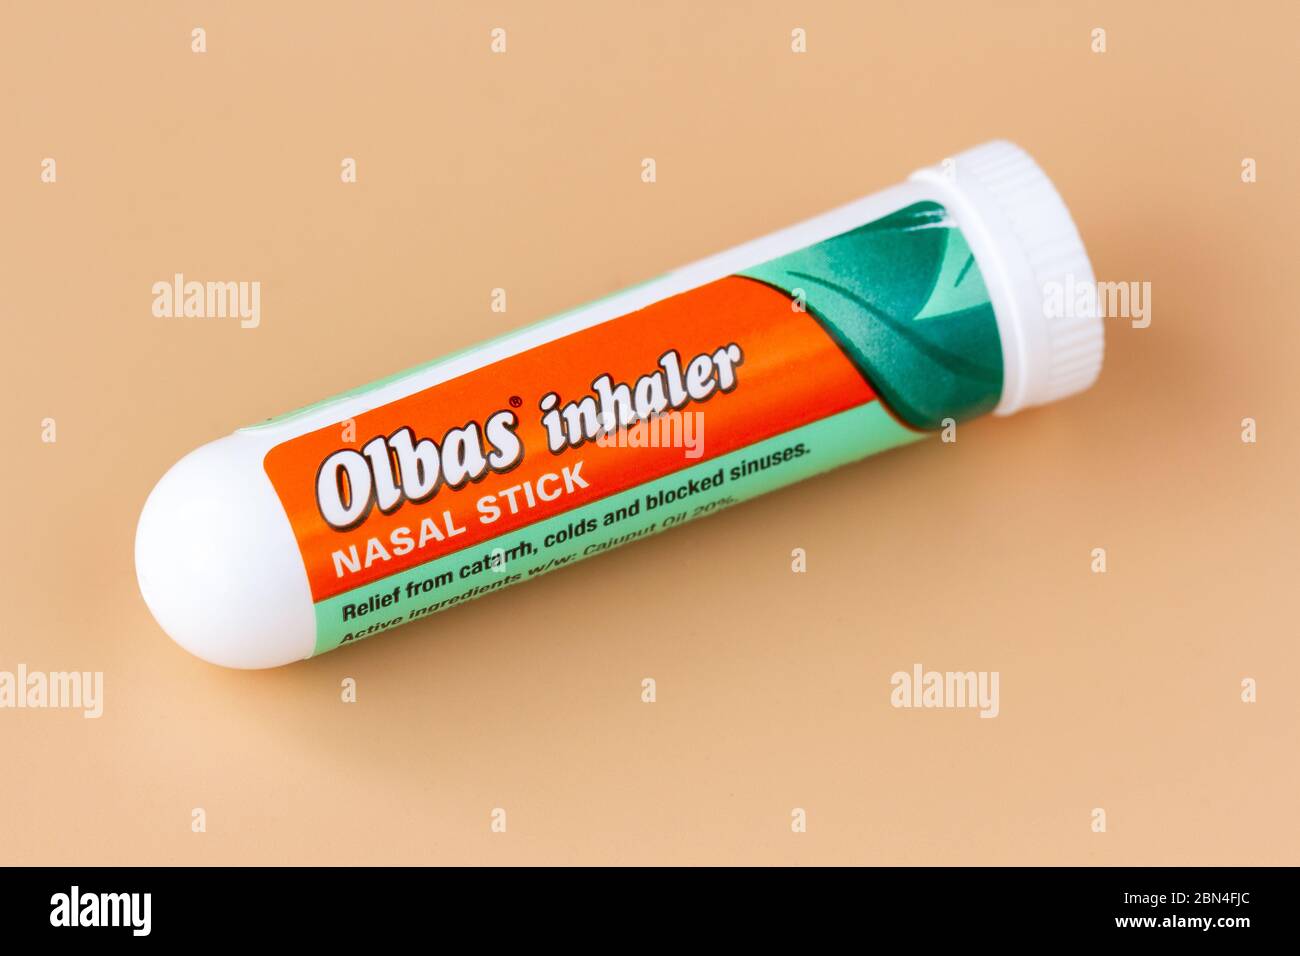 Olbas inhaler nasal stick for clearing blocked nose naturally Stock Photo